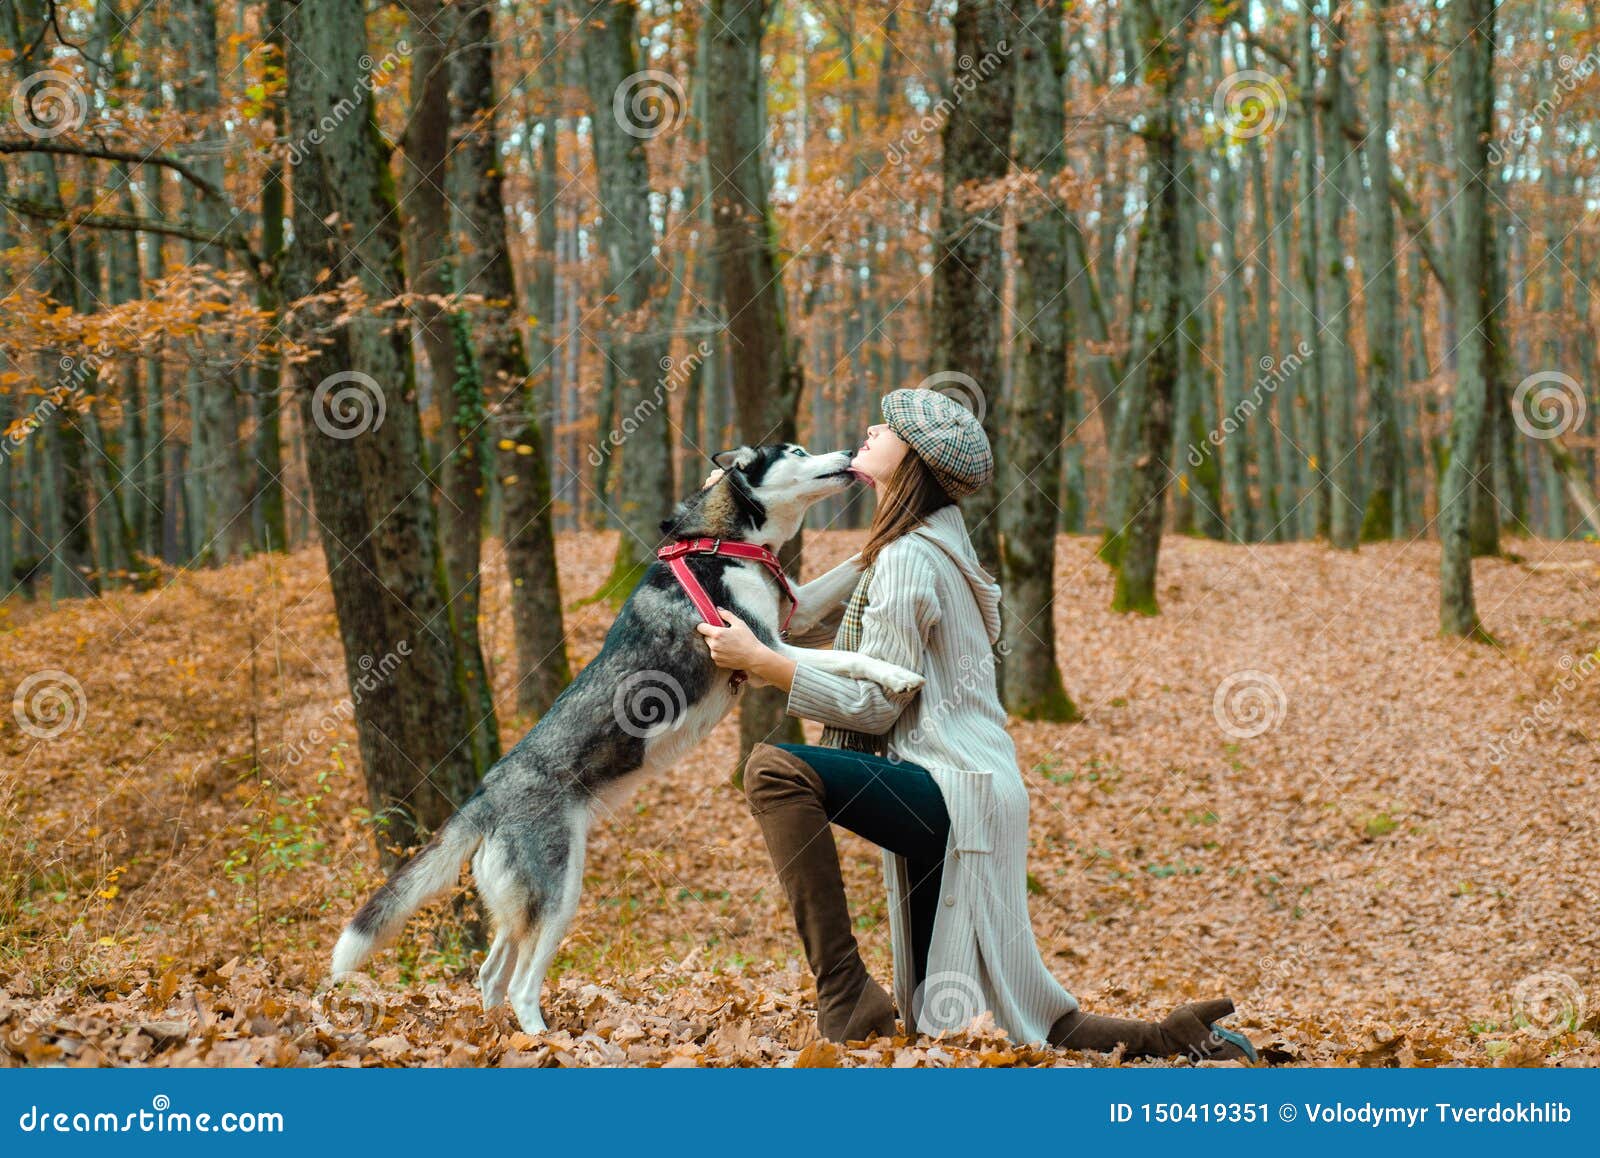 autumn womanin park. beautiful young woman playing with funny husky dog outdoors at park. autumn time, november.